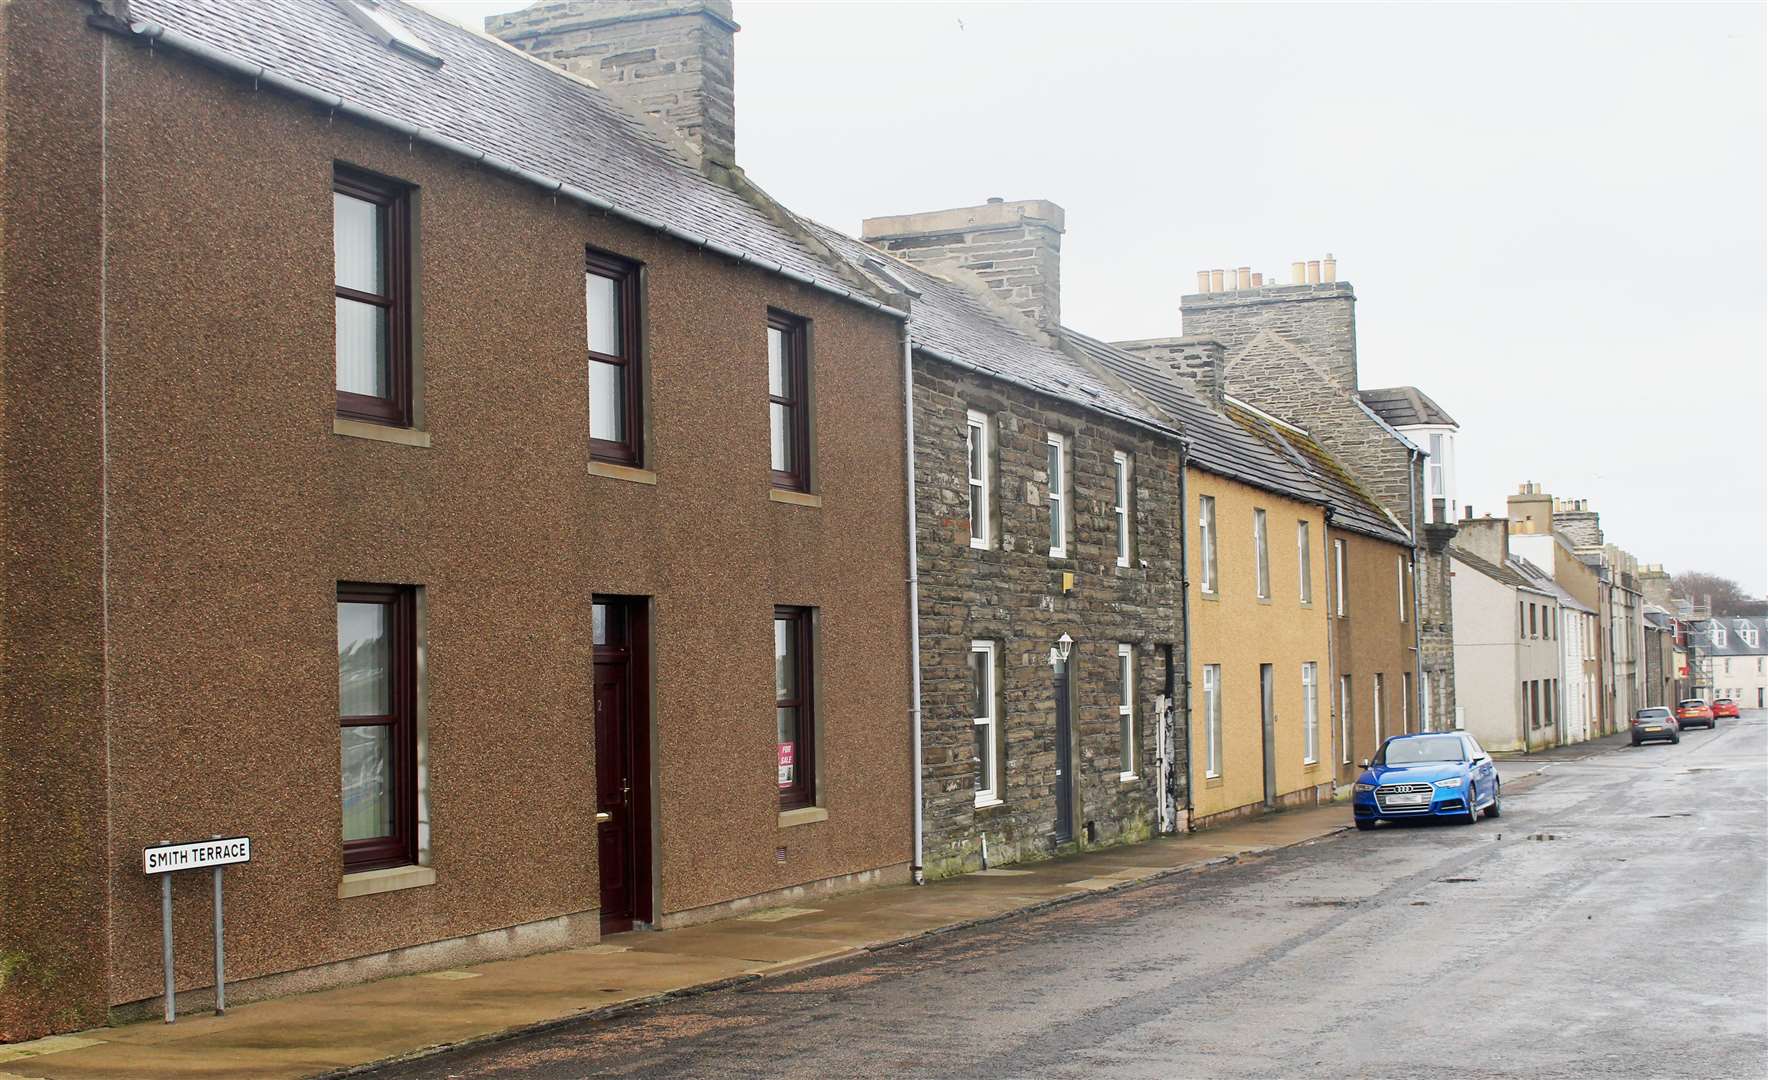 Don Budge's father, John, was born in Smith Terrace, Wick.